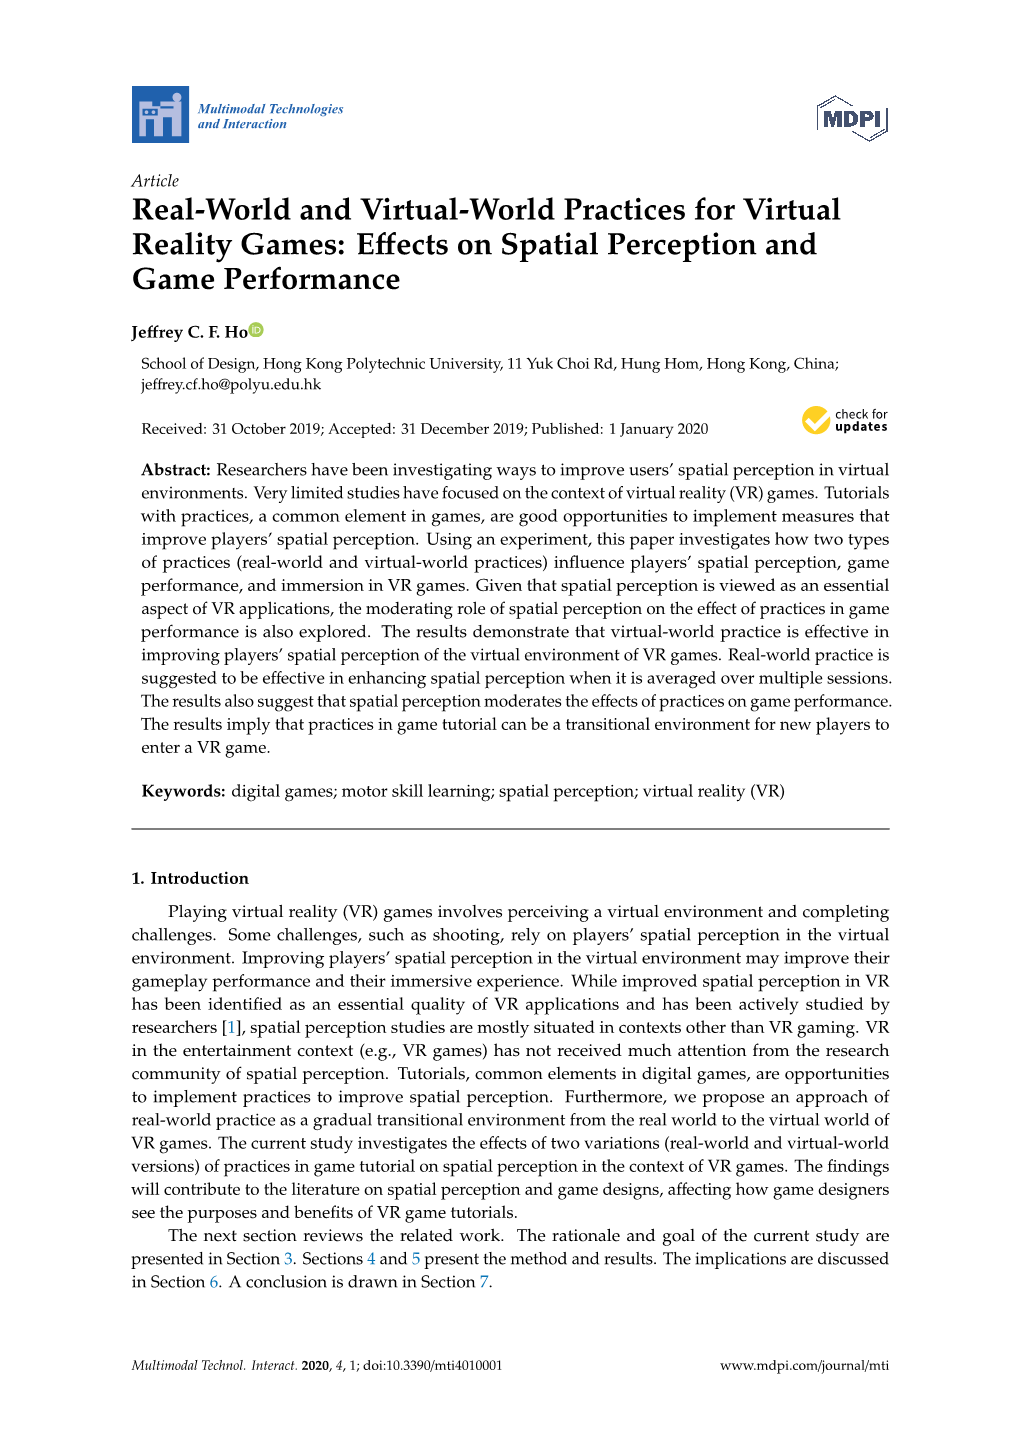 Real-World and Virtual-World Practices for Virtual Reality Games: Eﬀects on Spatial Perception and Game Performance